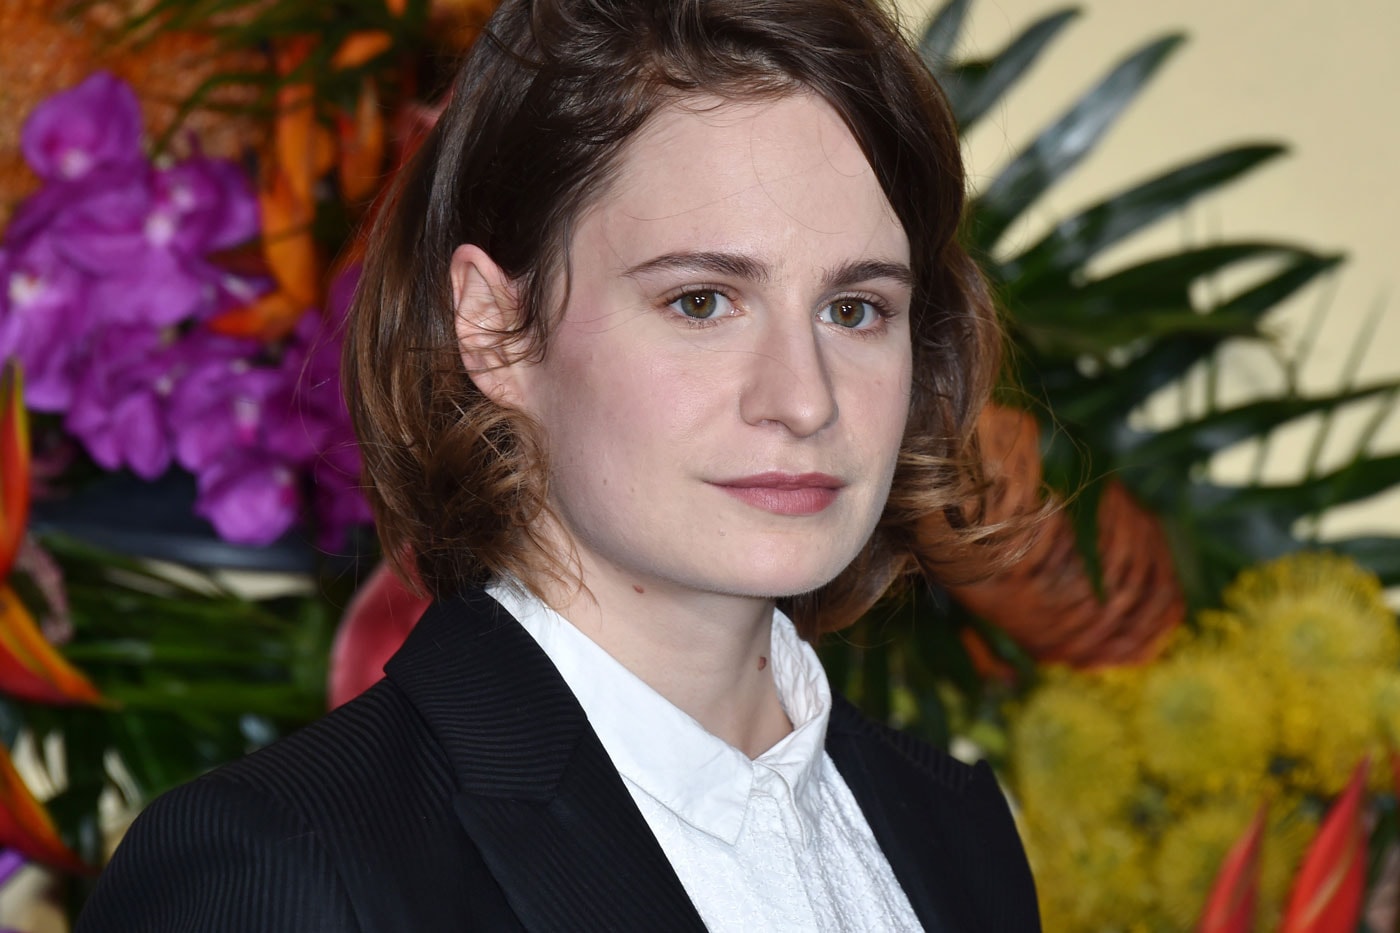 Watch Christine and the Queens Cover Beyoncé's "Sorry"